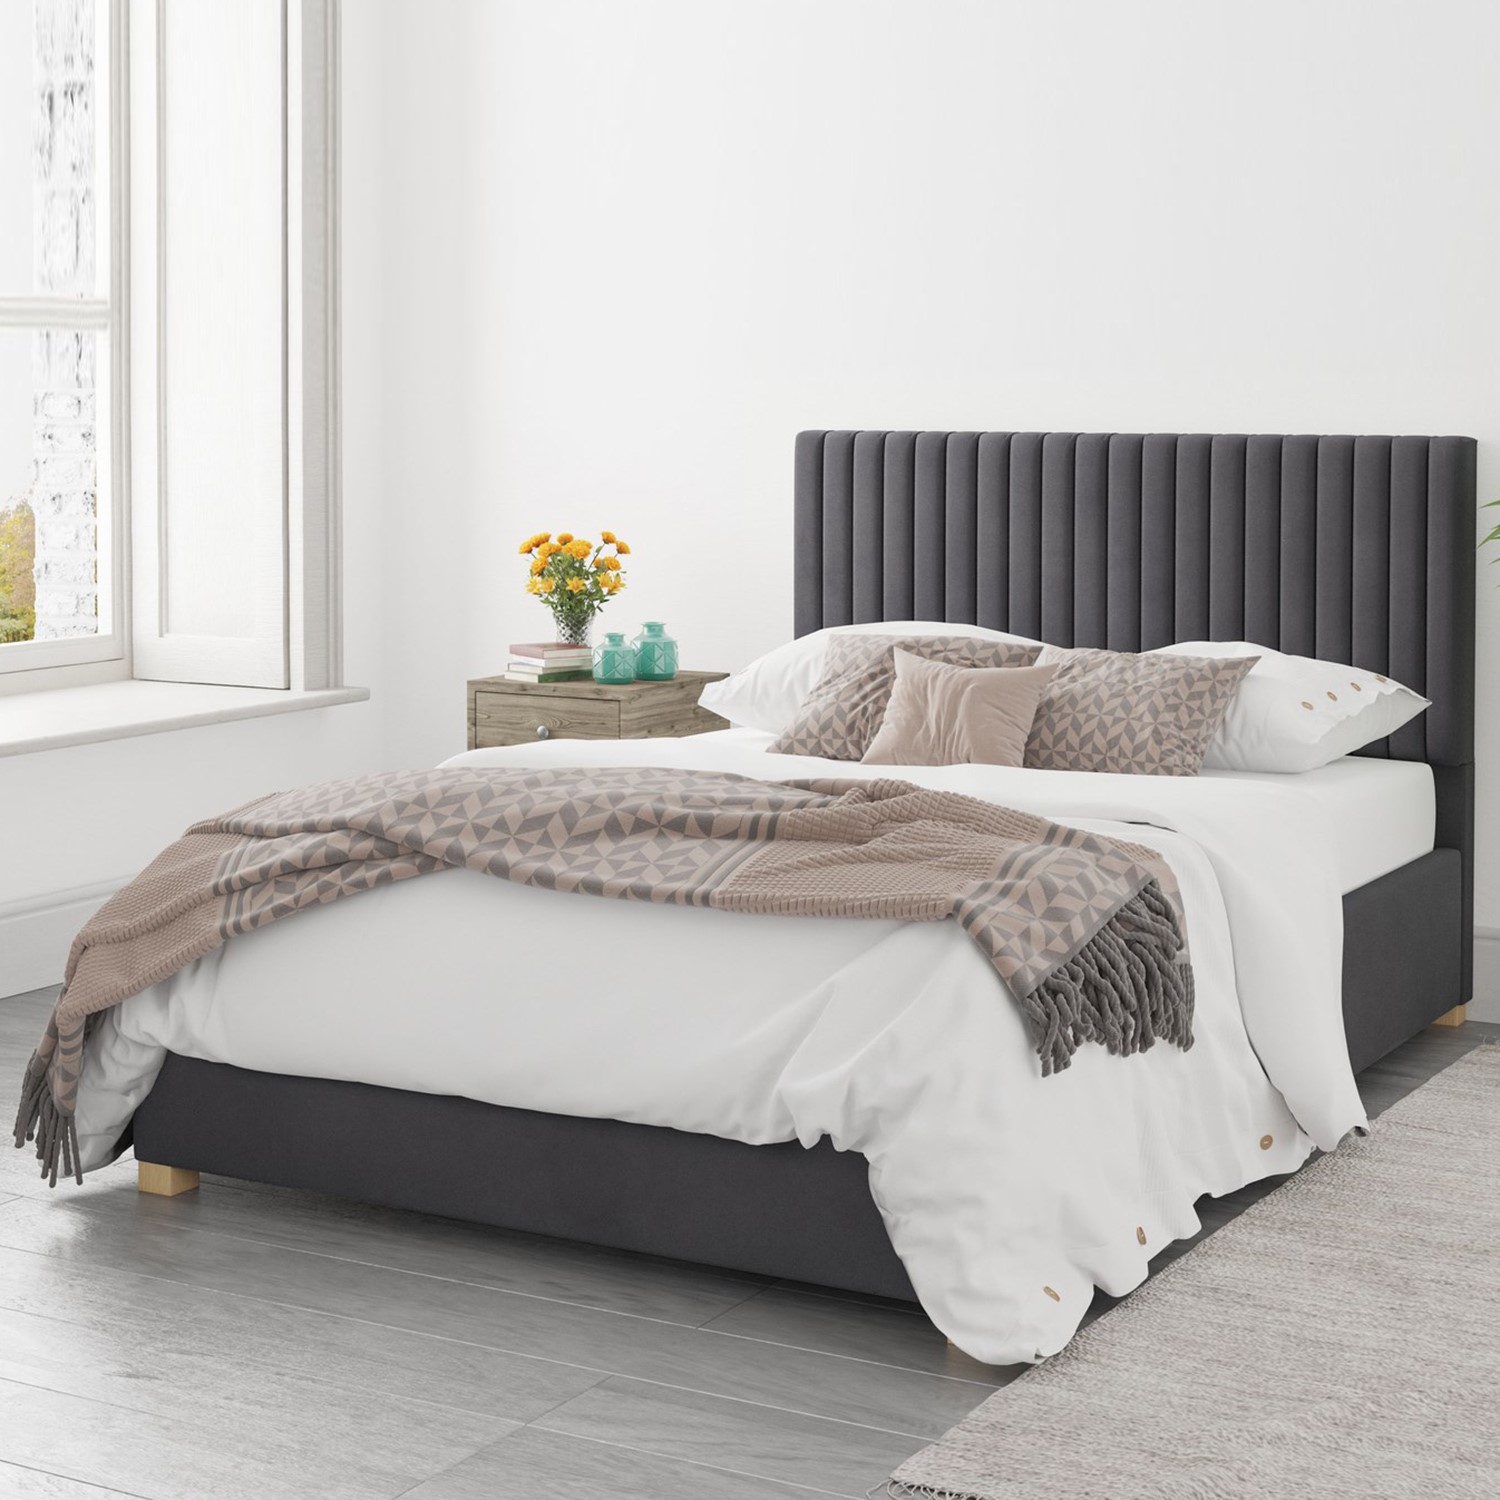 Read more about Grey velvet super king size ottoman bed piccadilly aspire